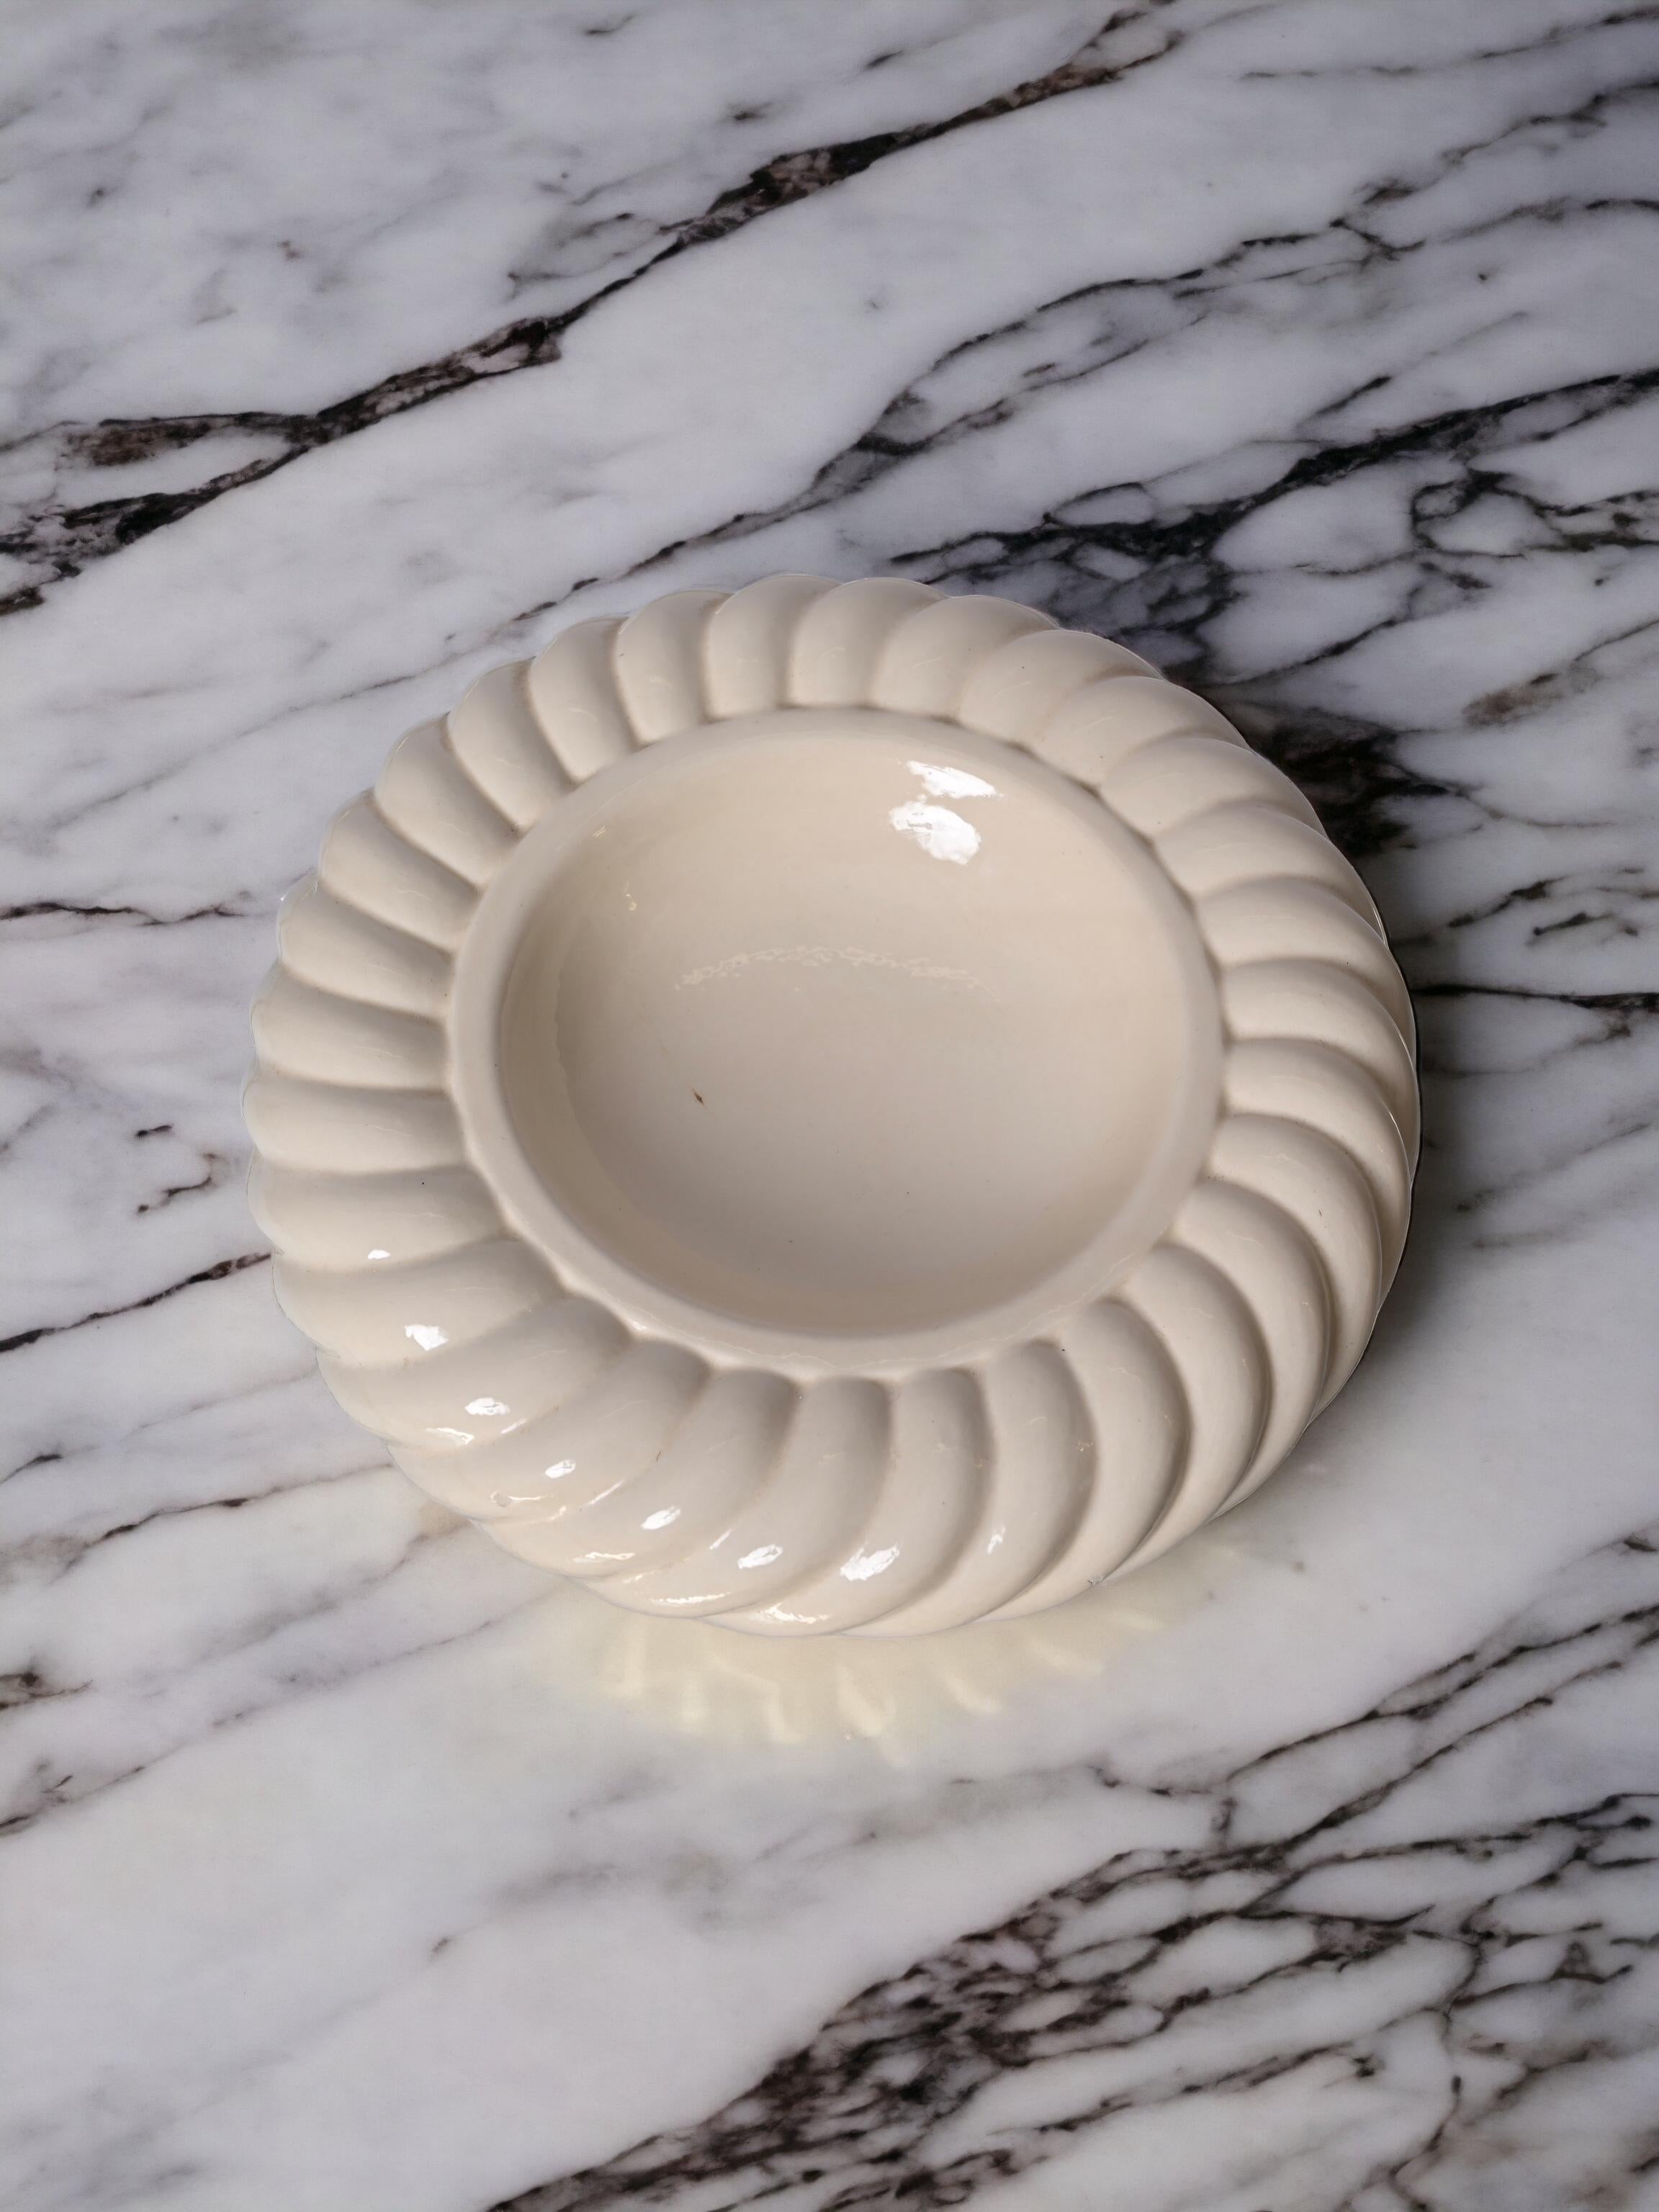 Incredible Mid-Century Modern white ceramic ashtray. This fantastic piece was designed by Tommaso Barbi and produced by B. Ceramiche in the late 1960s in Italy.

The manufacturer's brand stamp is at the bottom of the item while on the outside, the